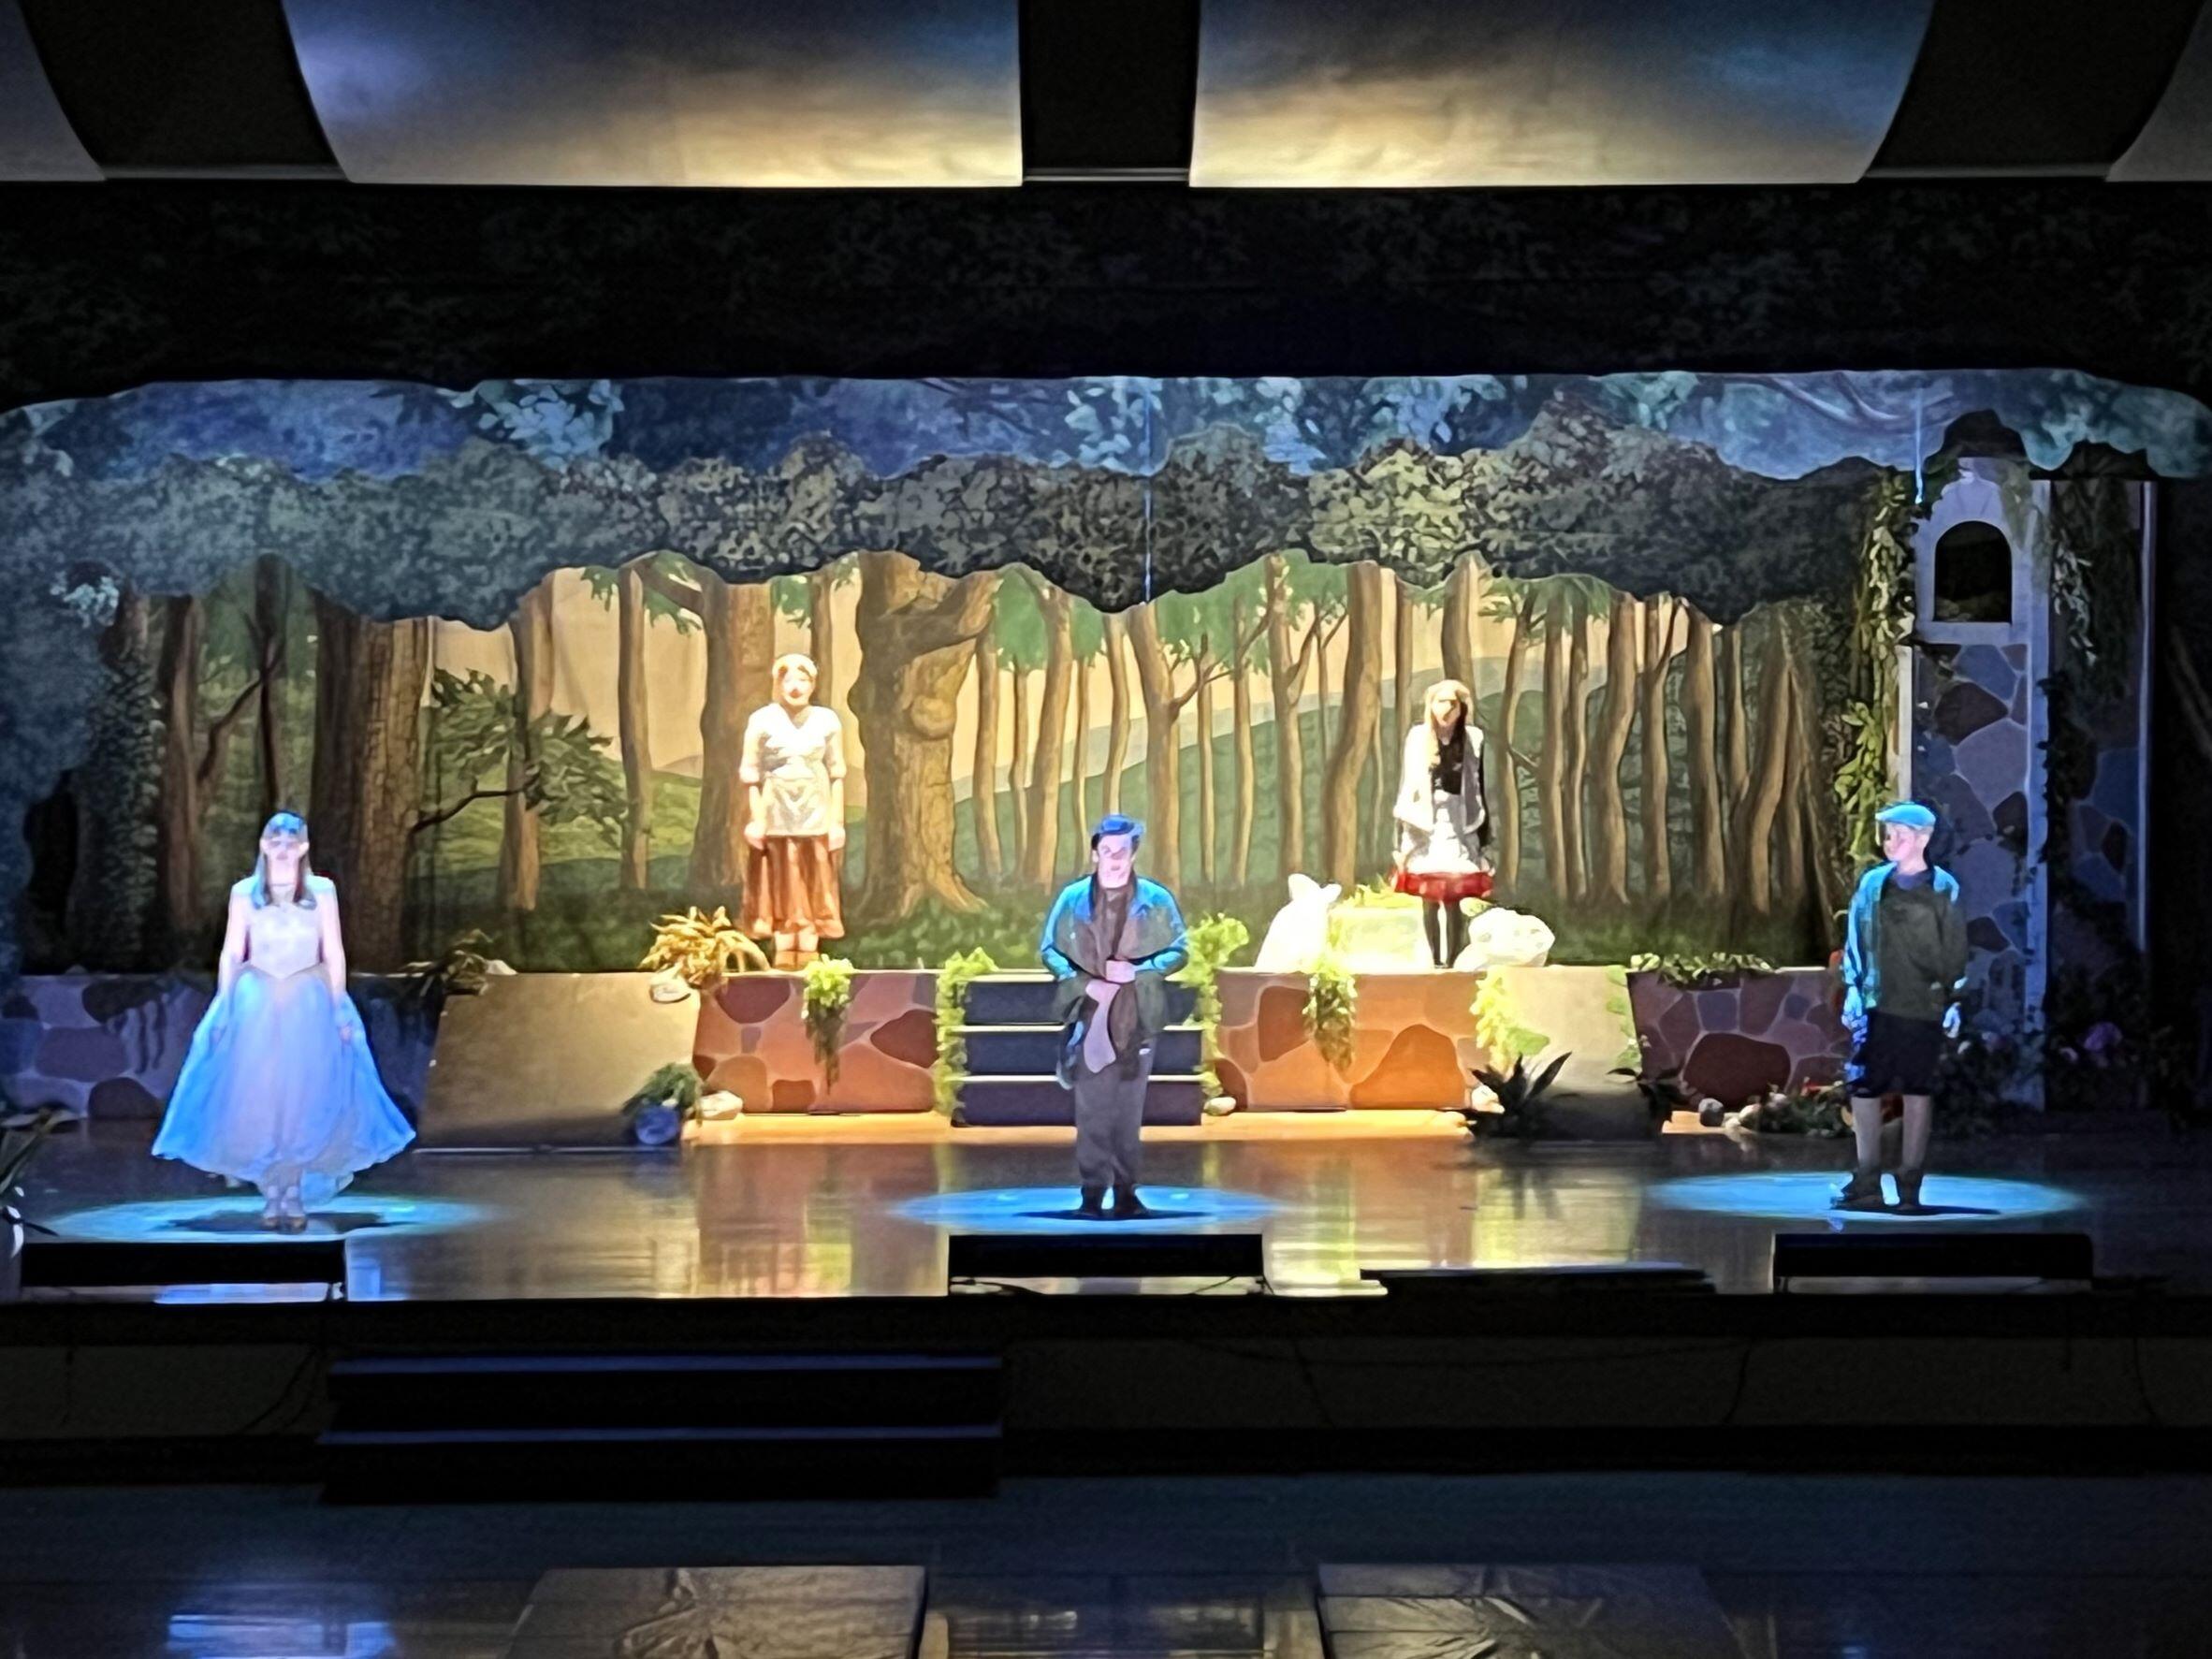 MS- 5 students performing in the play, Into the Woods. There are 2 students in the background, and 3 students in the foreground